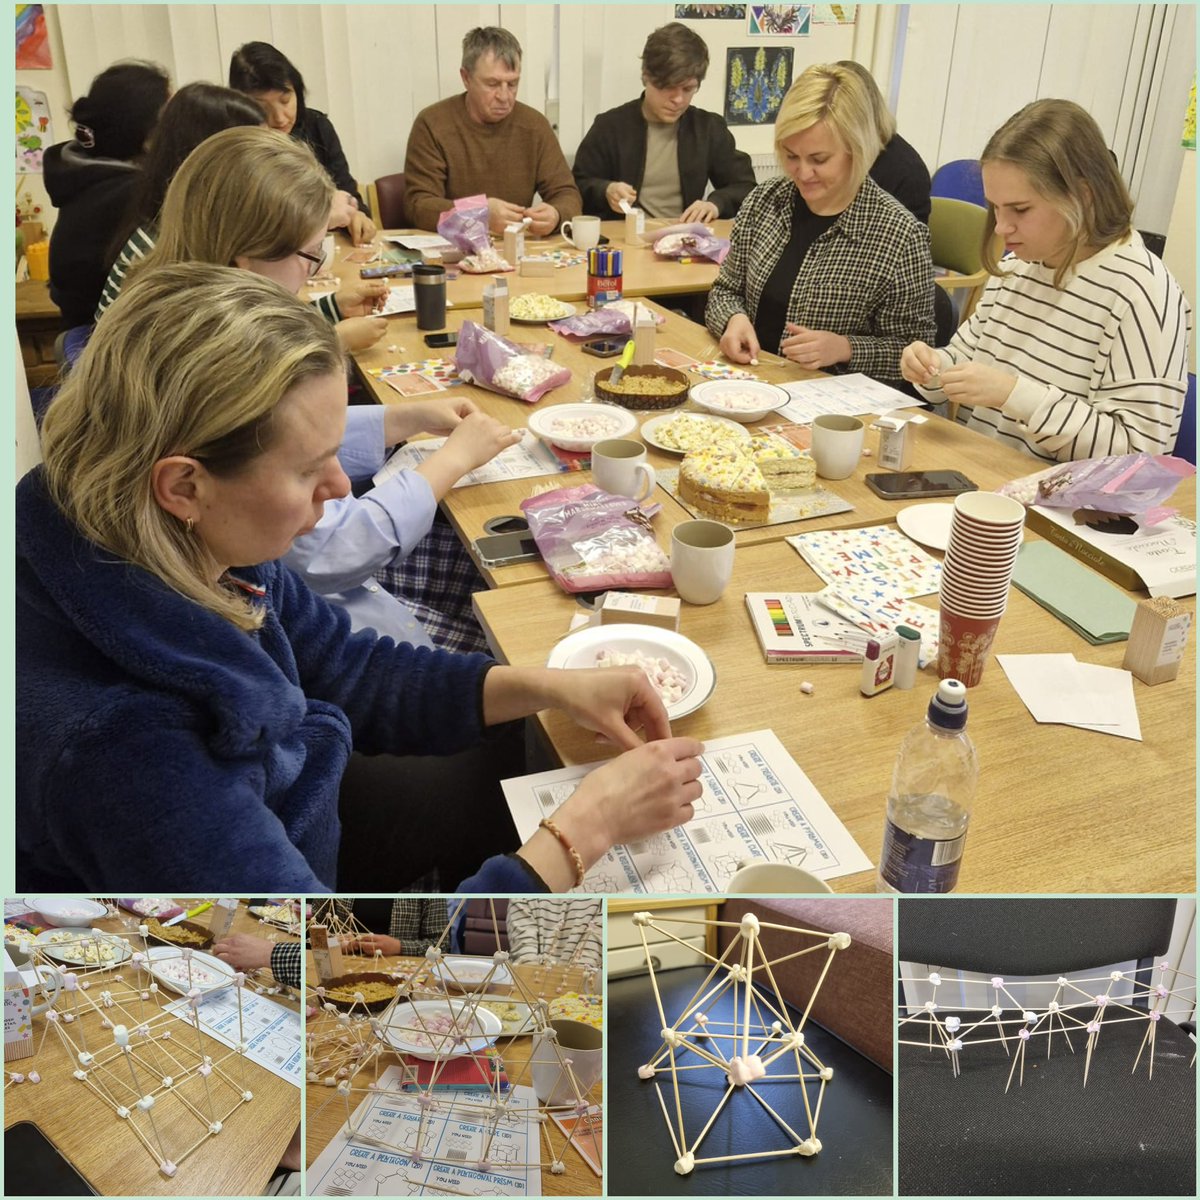 Thanks to Angela from Sum It Up for attending the ESOL Chat Cafe in Coatbridge today. The group enjoyed completing the Marshmallow Challenge and creating 3D structures #multiply #AdultLearningMatters #BecauseOfCLD